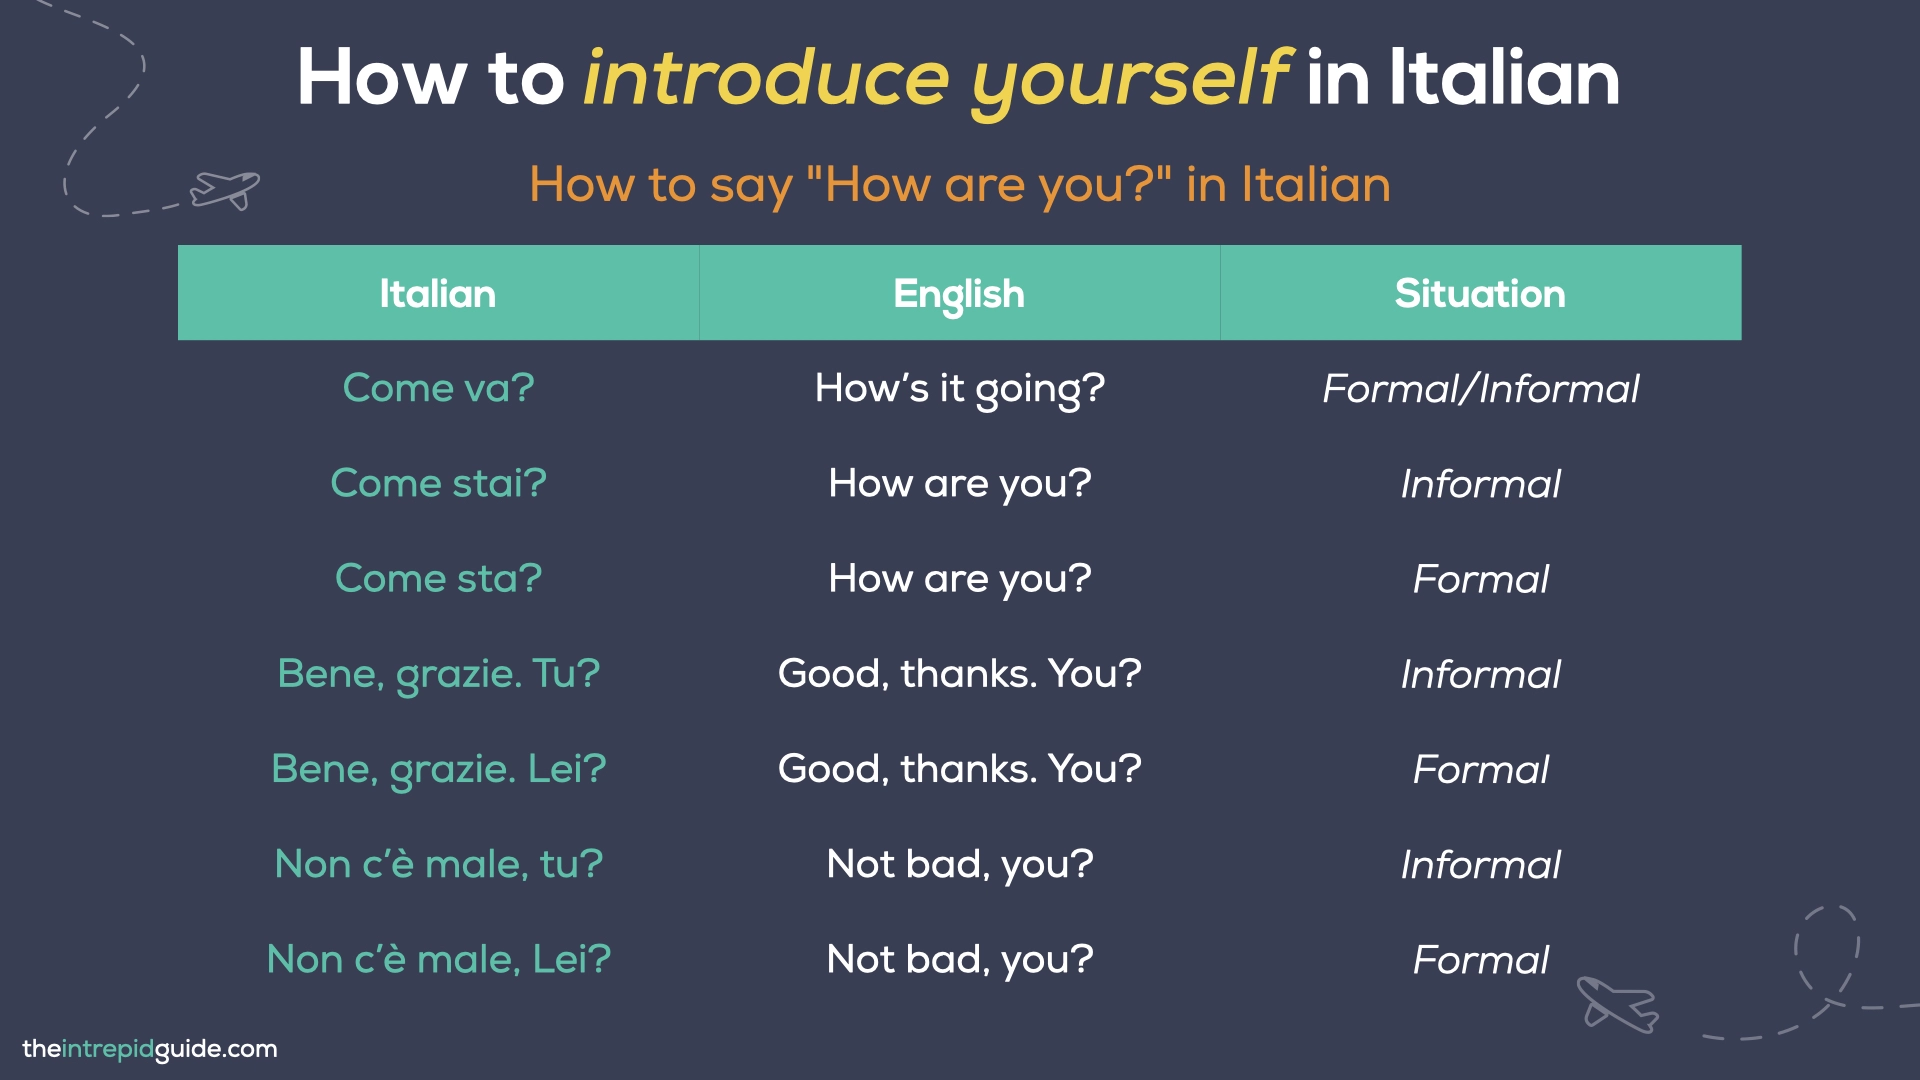 How to introduce yourself in Italian - How to say how are you in Italian